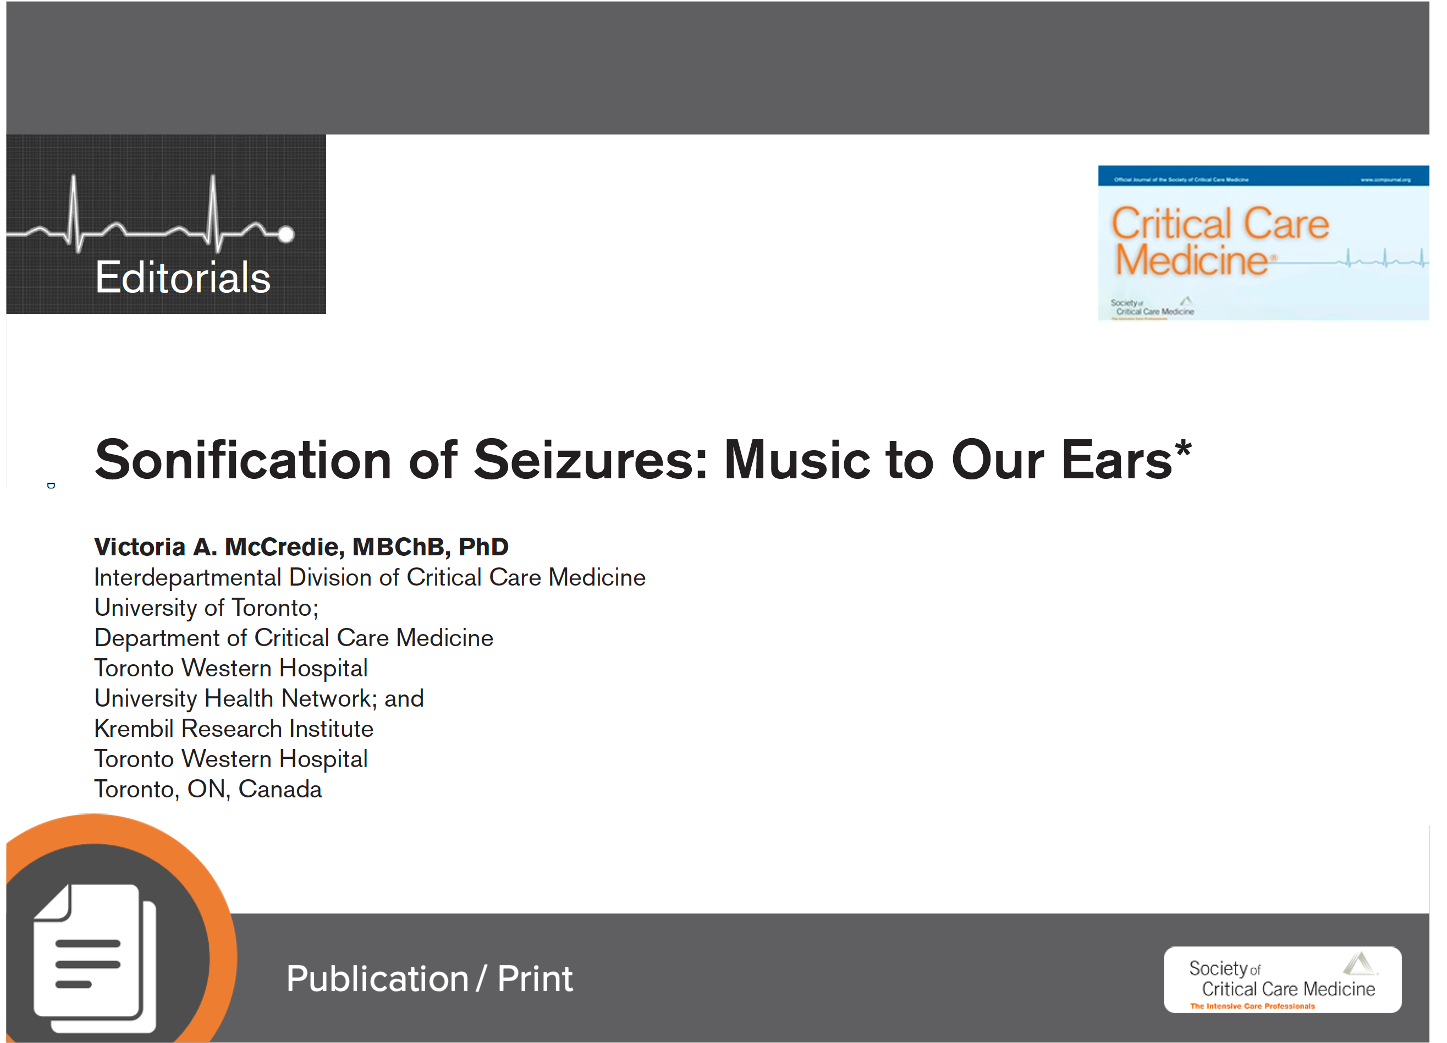 DECIDE Study Editorial: Sonification of Seizures: Music to Our Ears